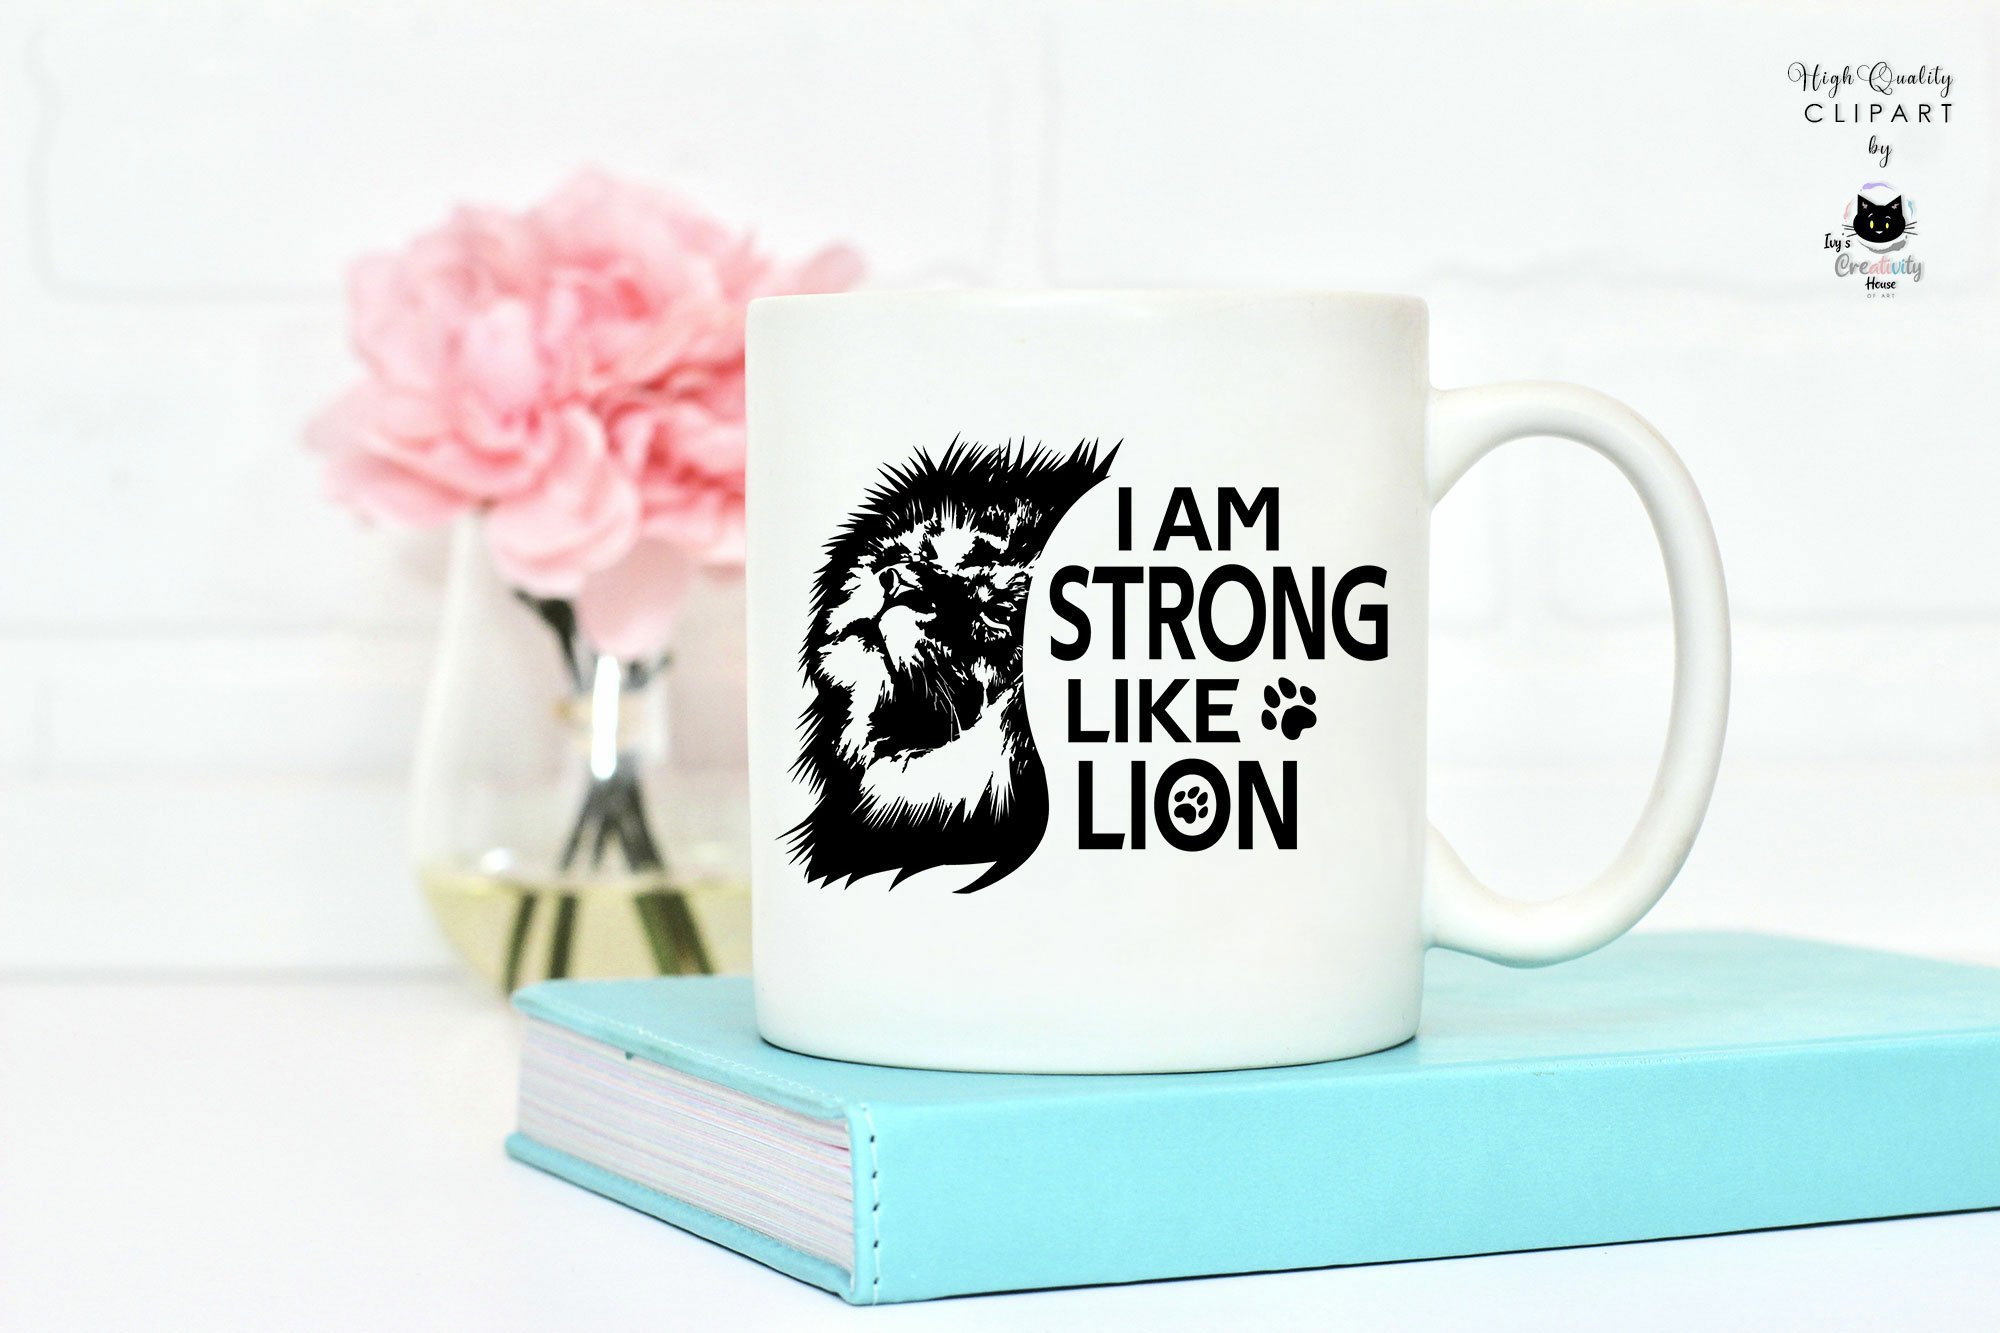 White cup with black lion.